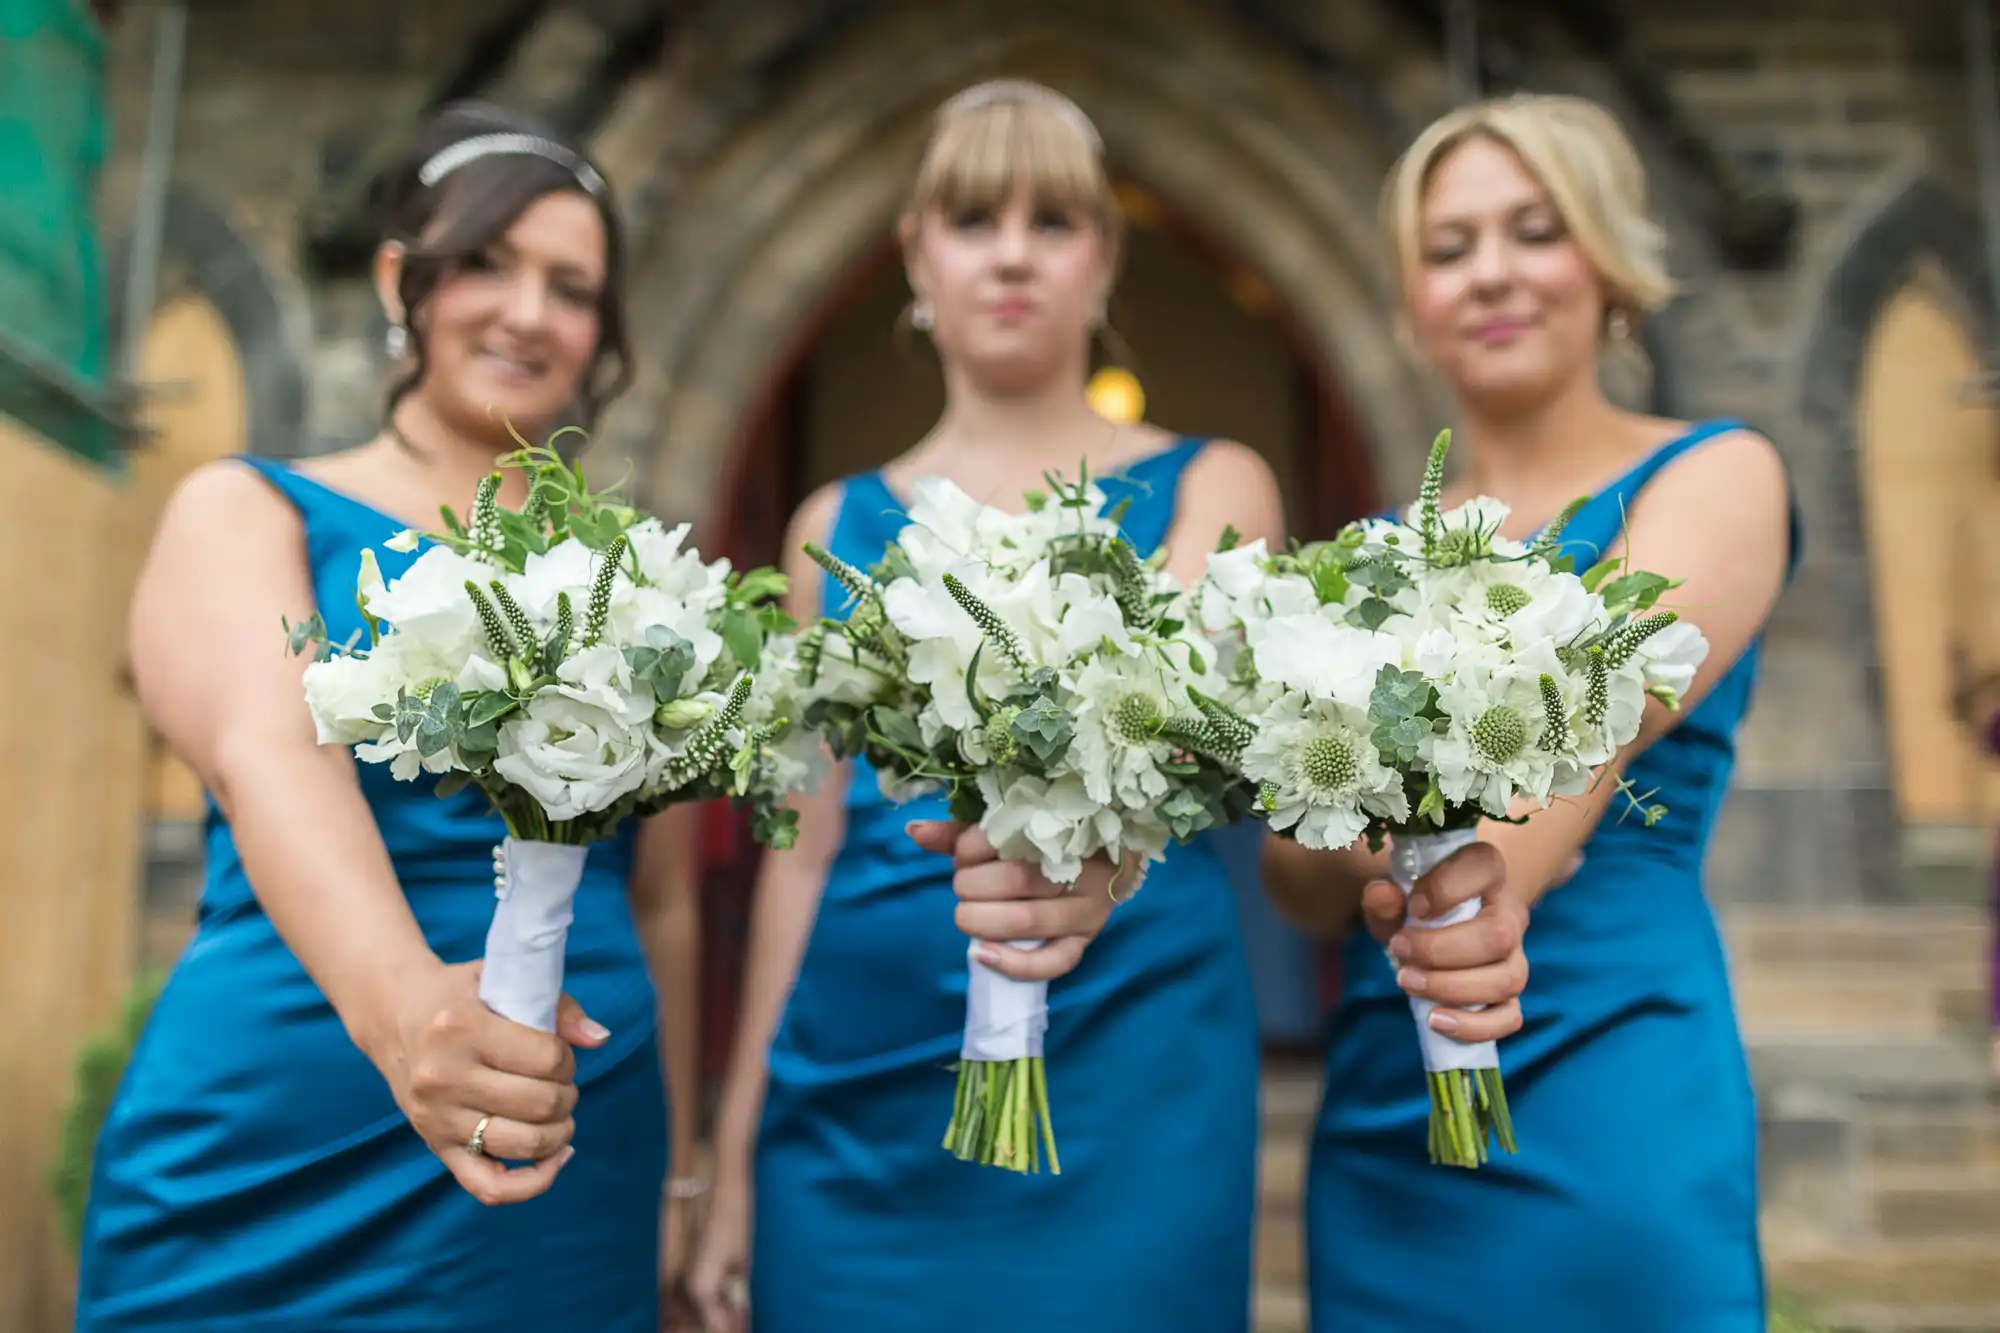 Three bridesmaids in blue dresses holding white floral bouquets in front of a church entrance.